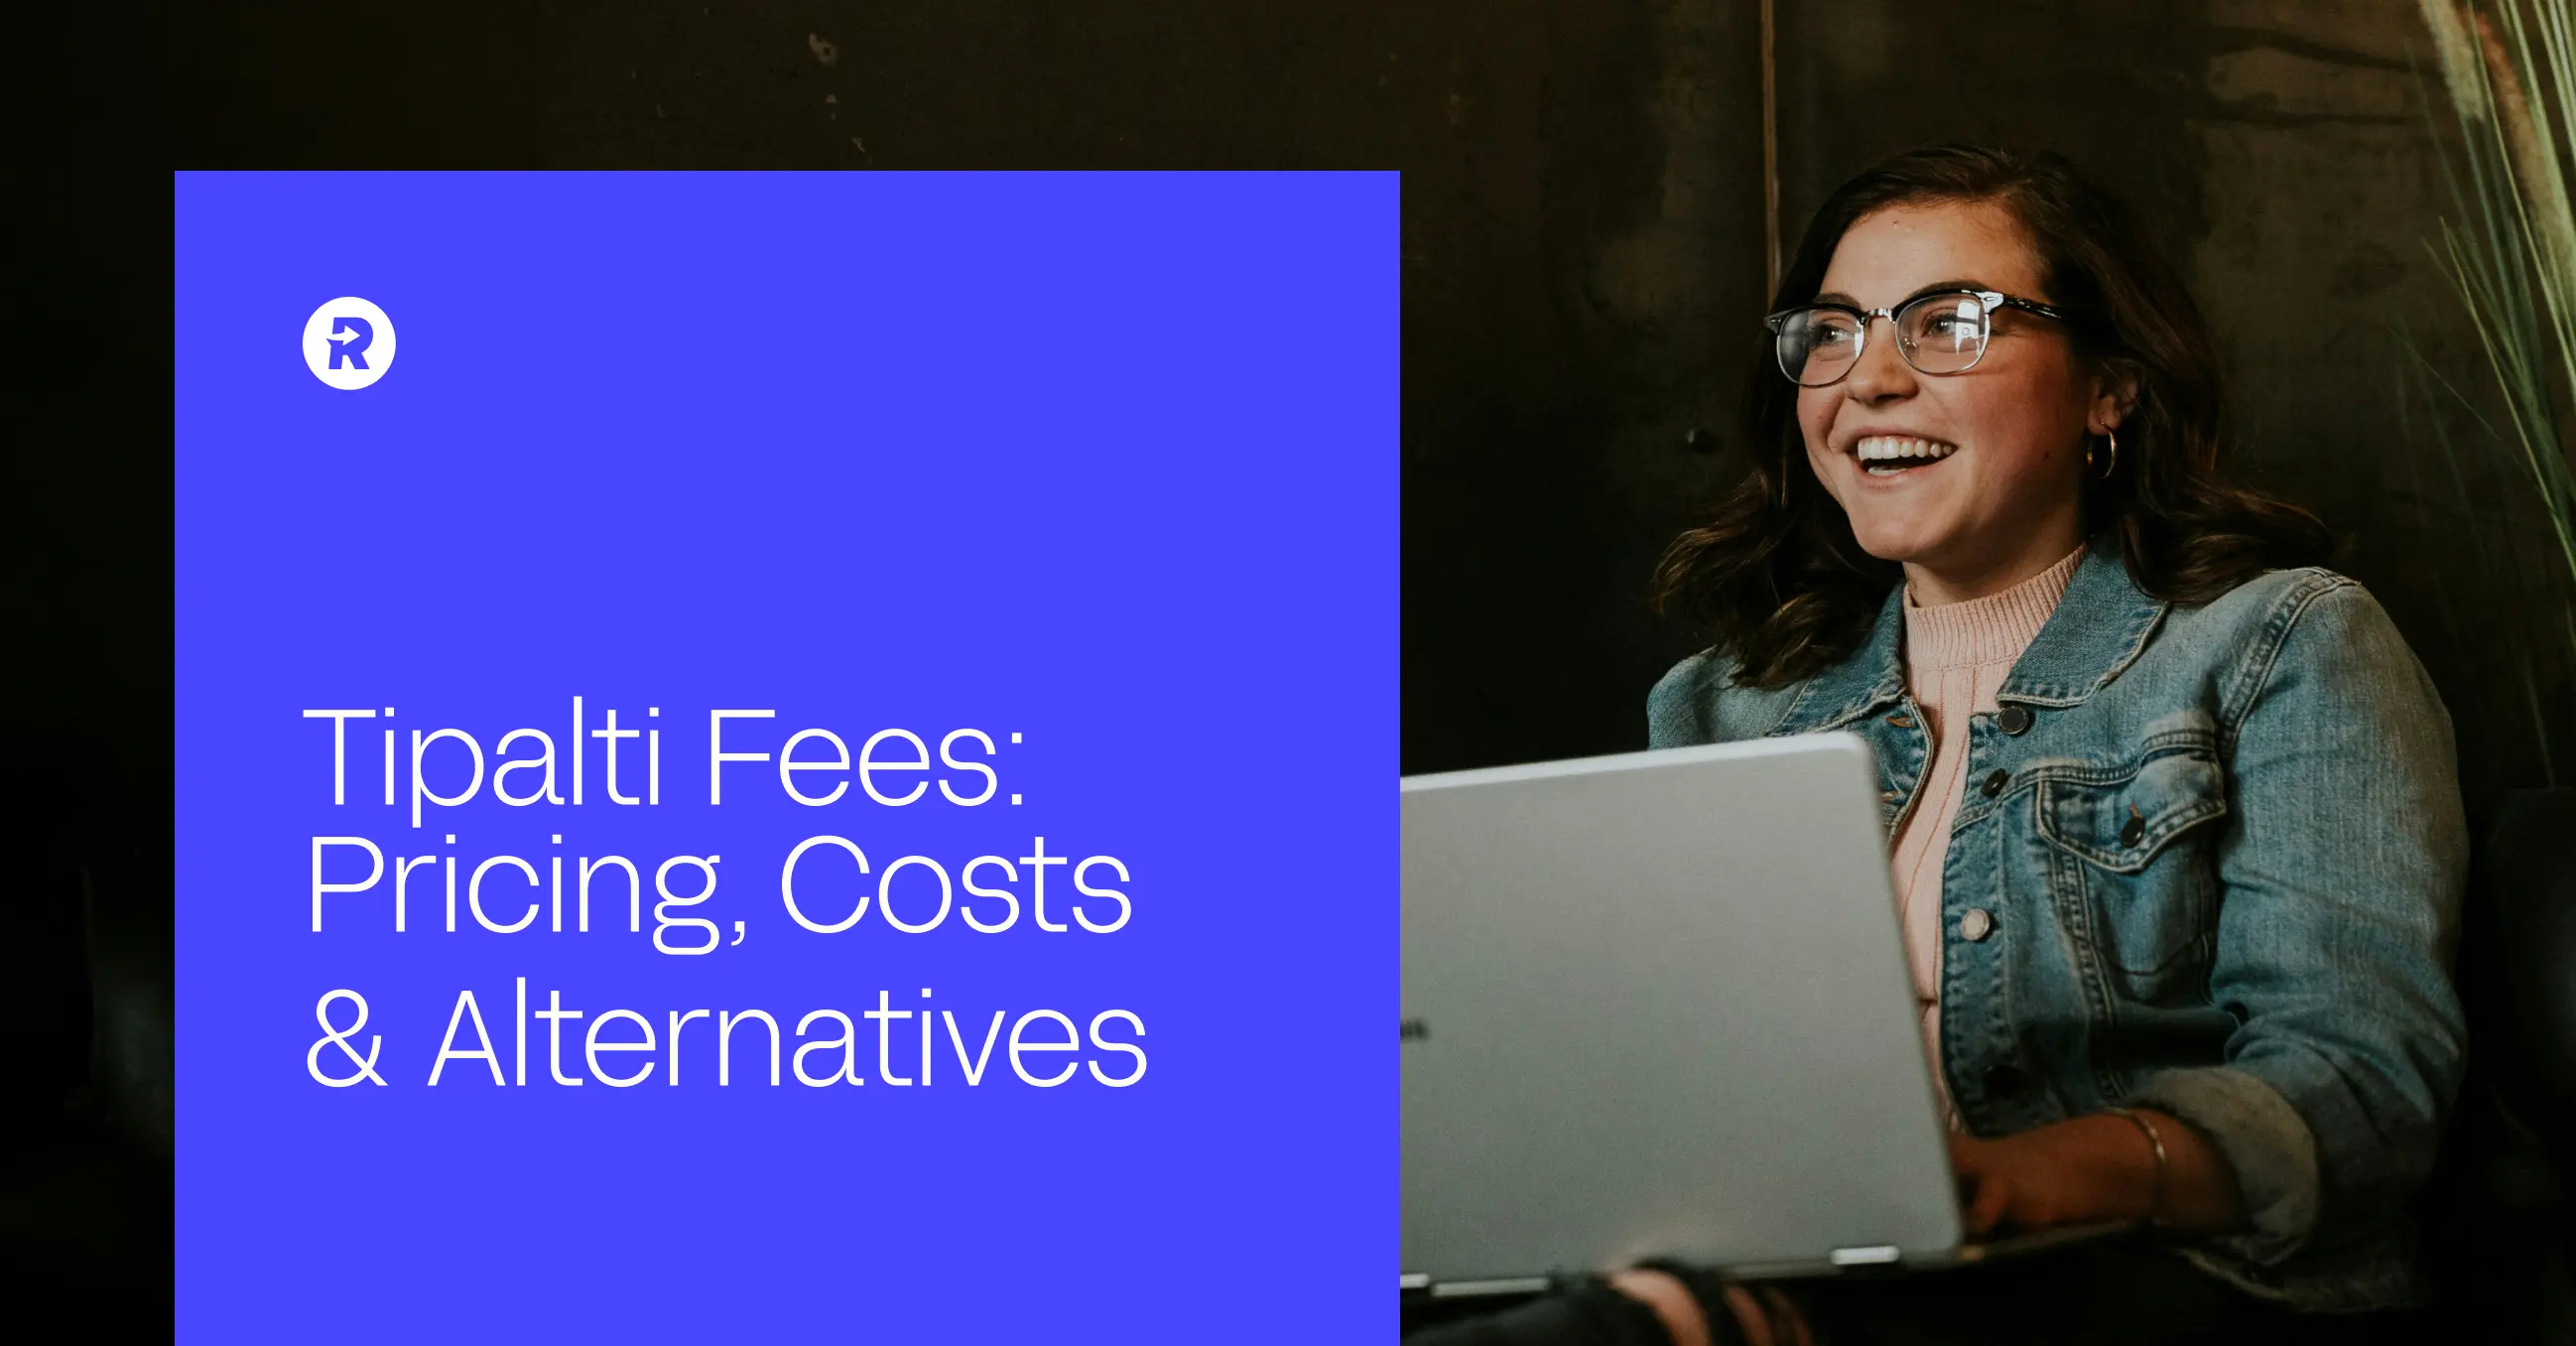 Tipalti Fees: Pricing, Costs & Alternatives